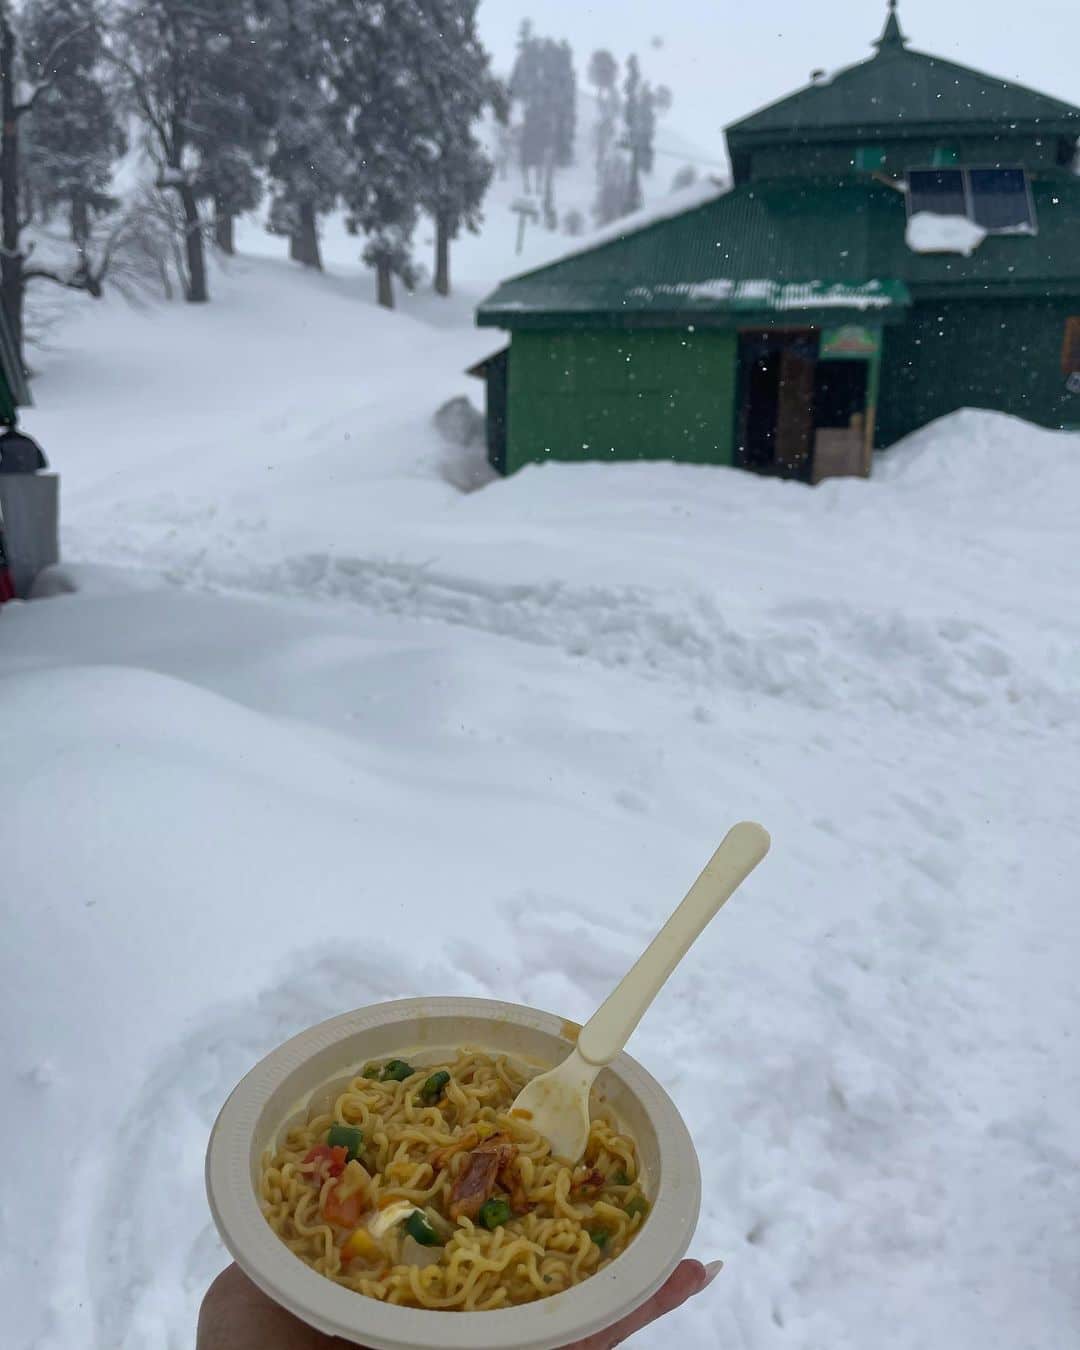 Mouni enjoys piping hot Maggie in the mountains